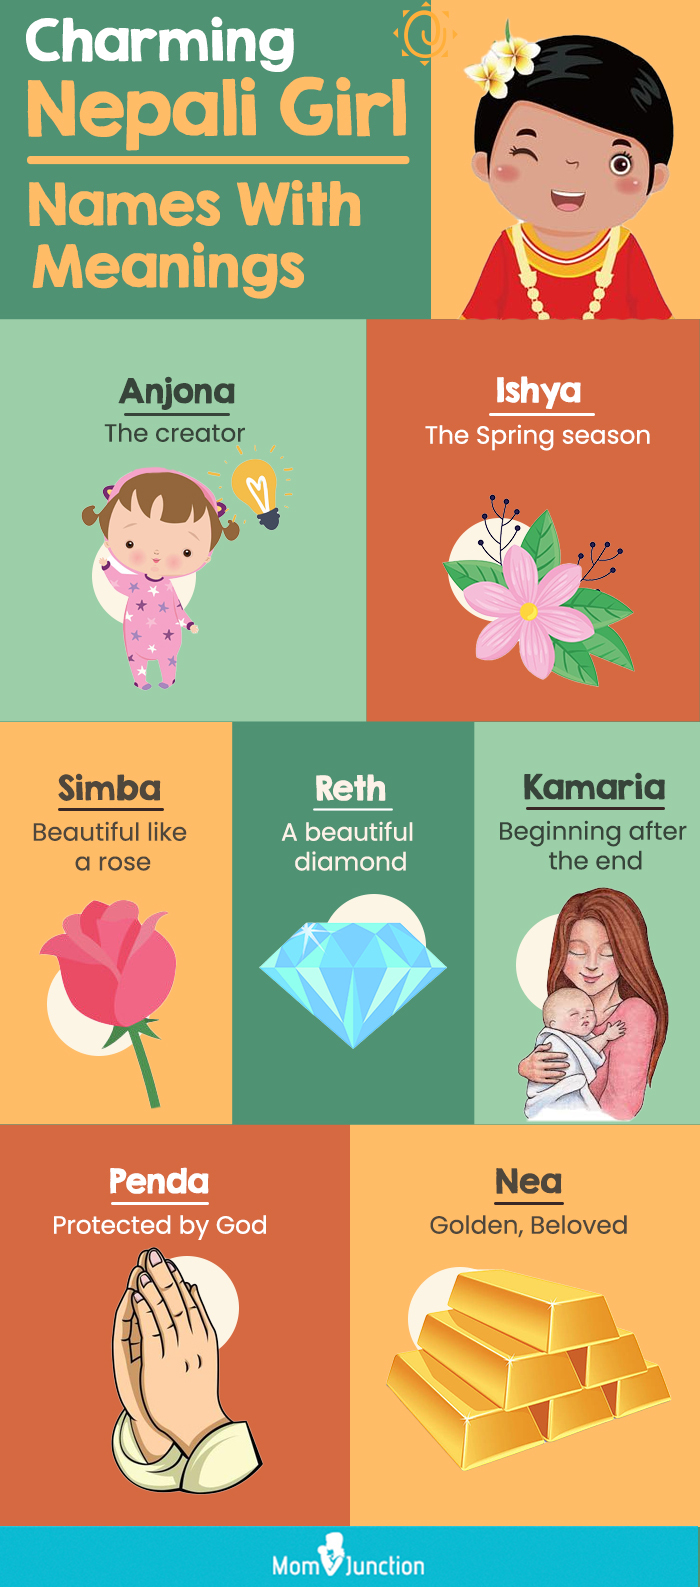 charming nepali girl names with meanings (infographic)